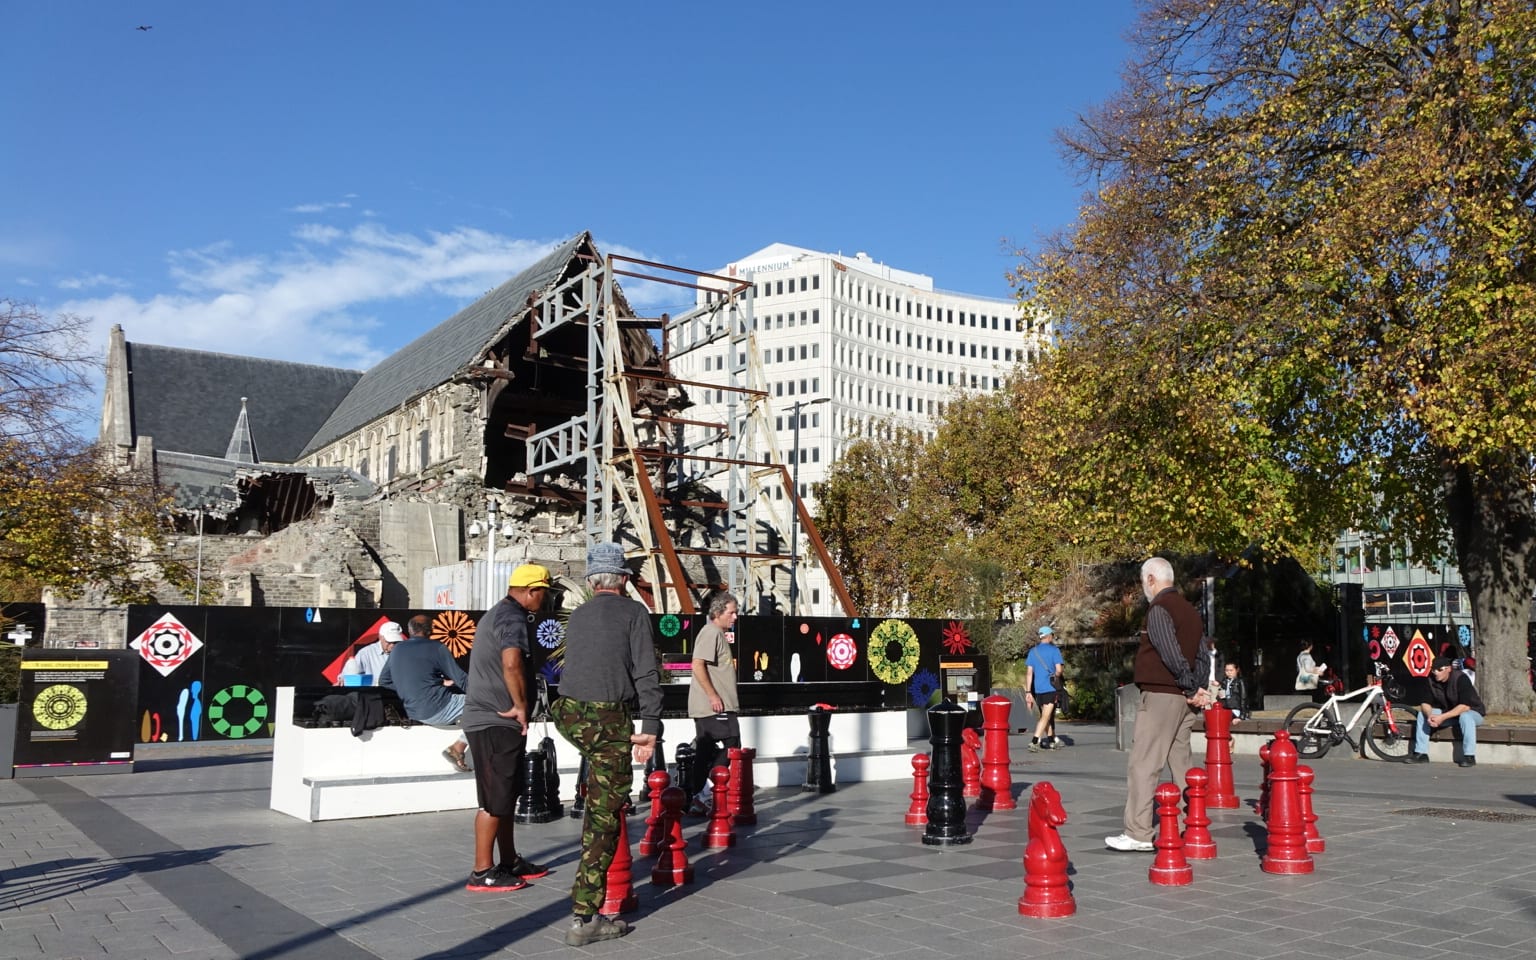 Christchurch's Cathedral Square is again busy with people enjoying a sunny Sunday afternoon, but five years on the cathedral still waits in disrepair.